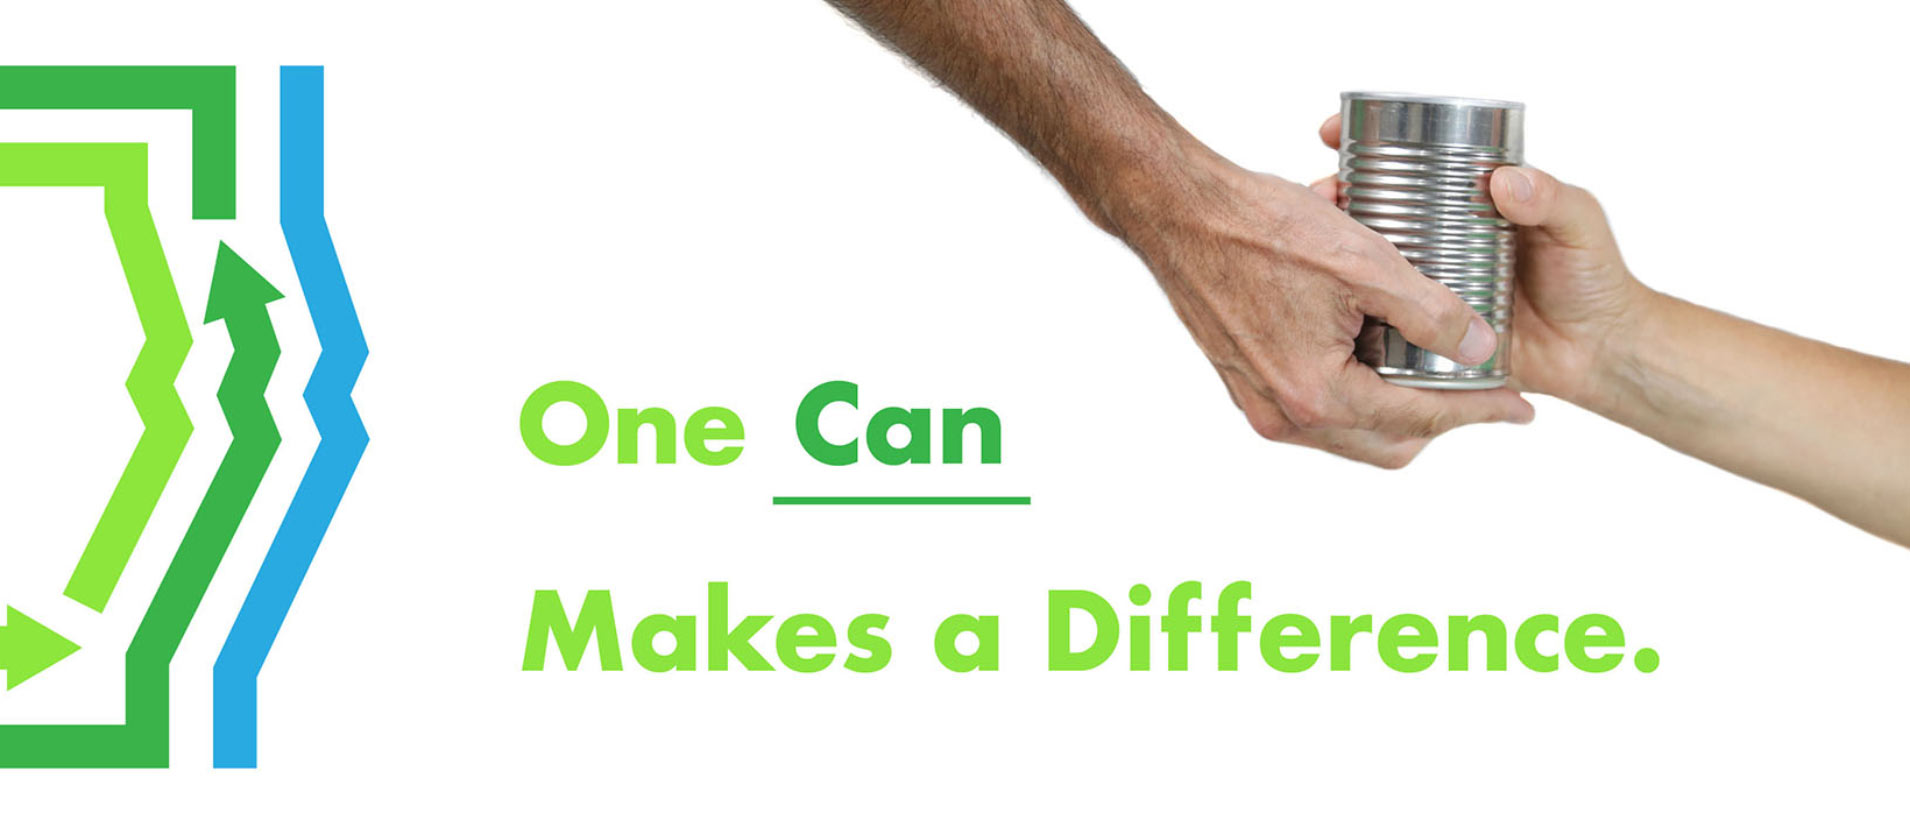 SCFB-One-Can-Makes-Difference-1910x834_c_optimised